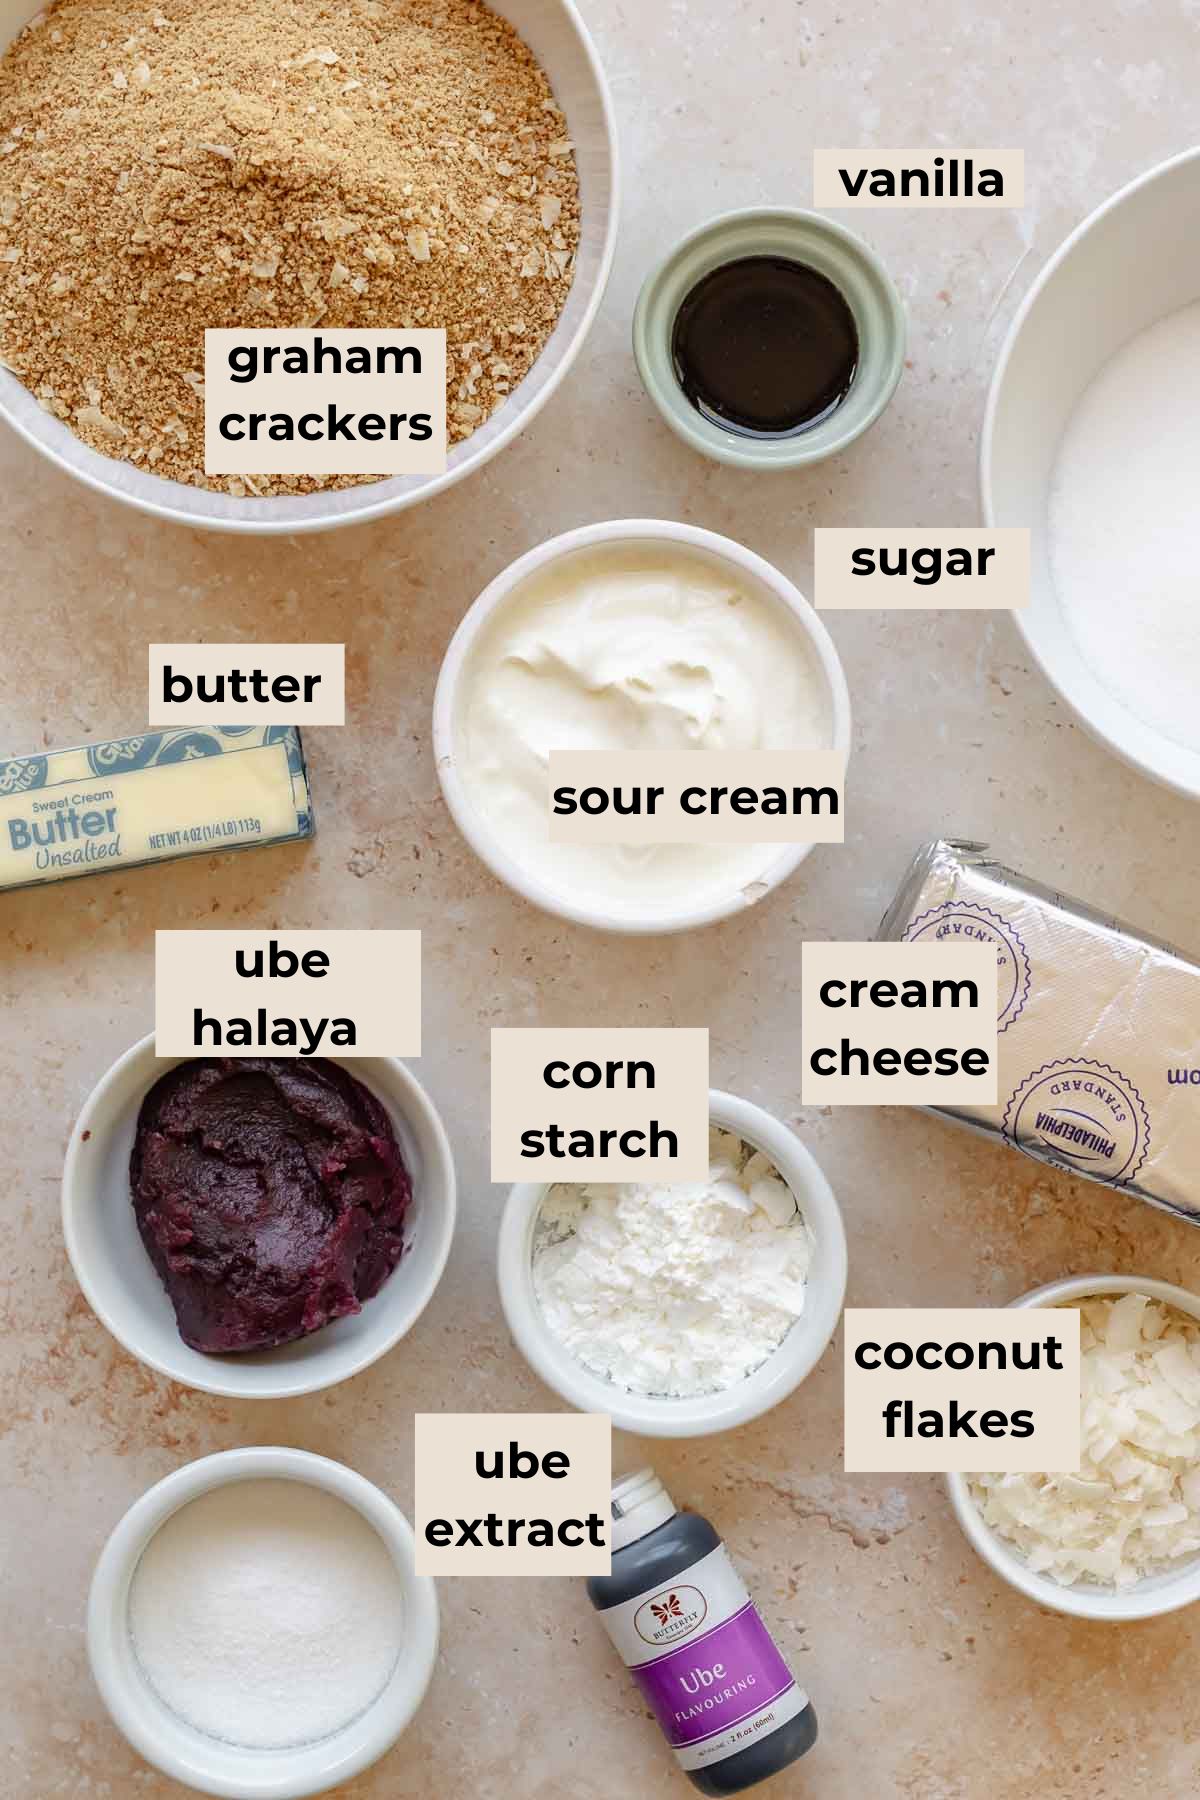 Ingredients for use cheesecake.